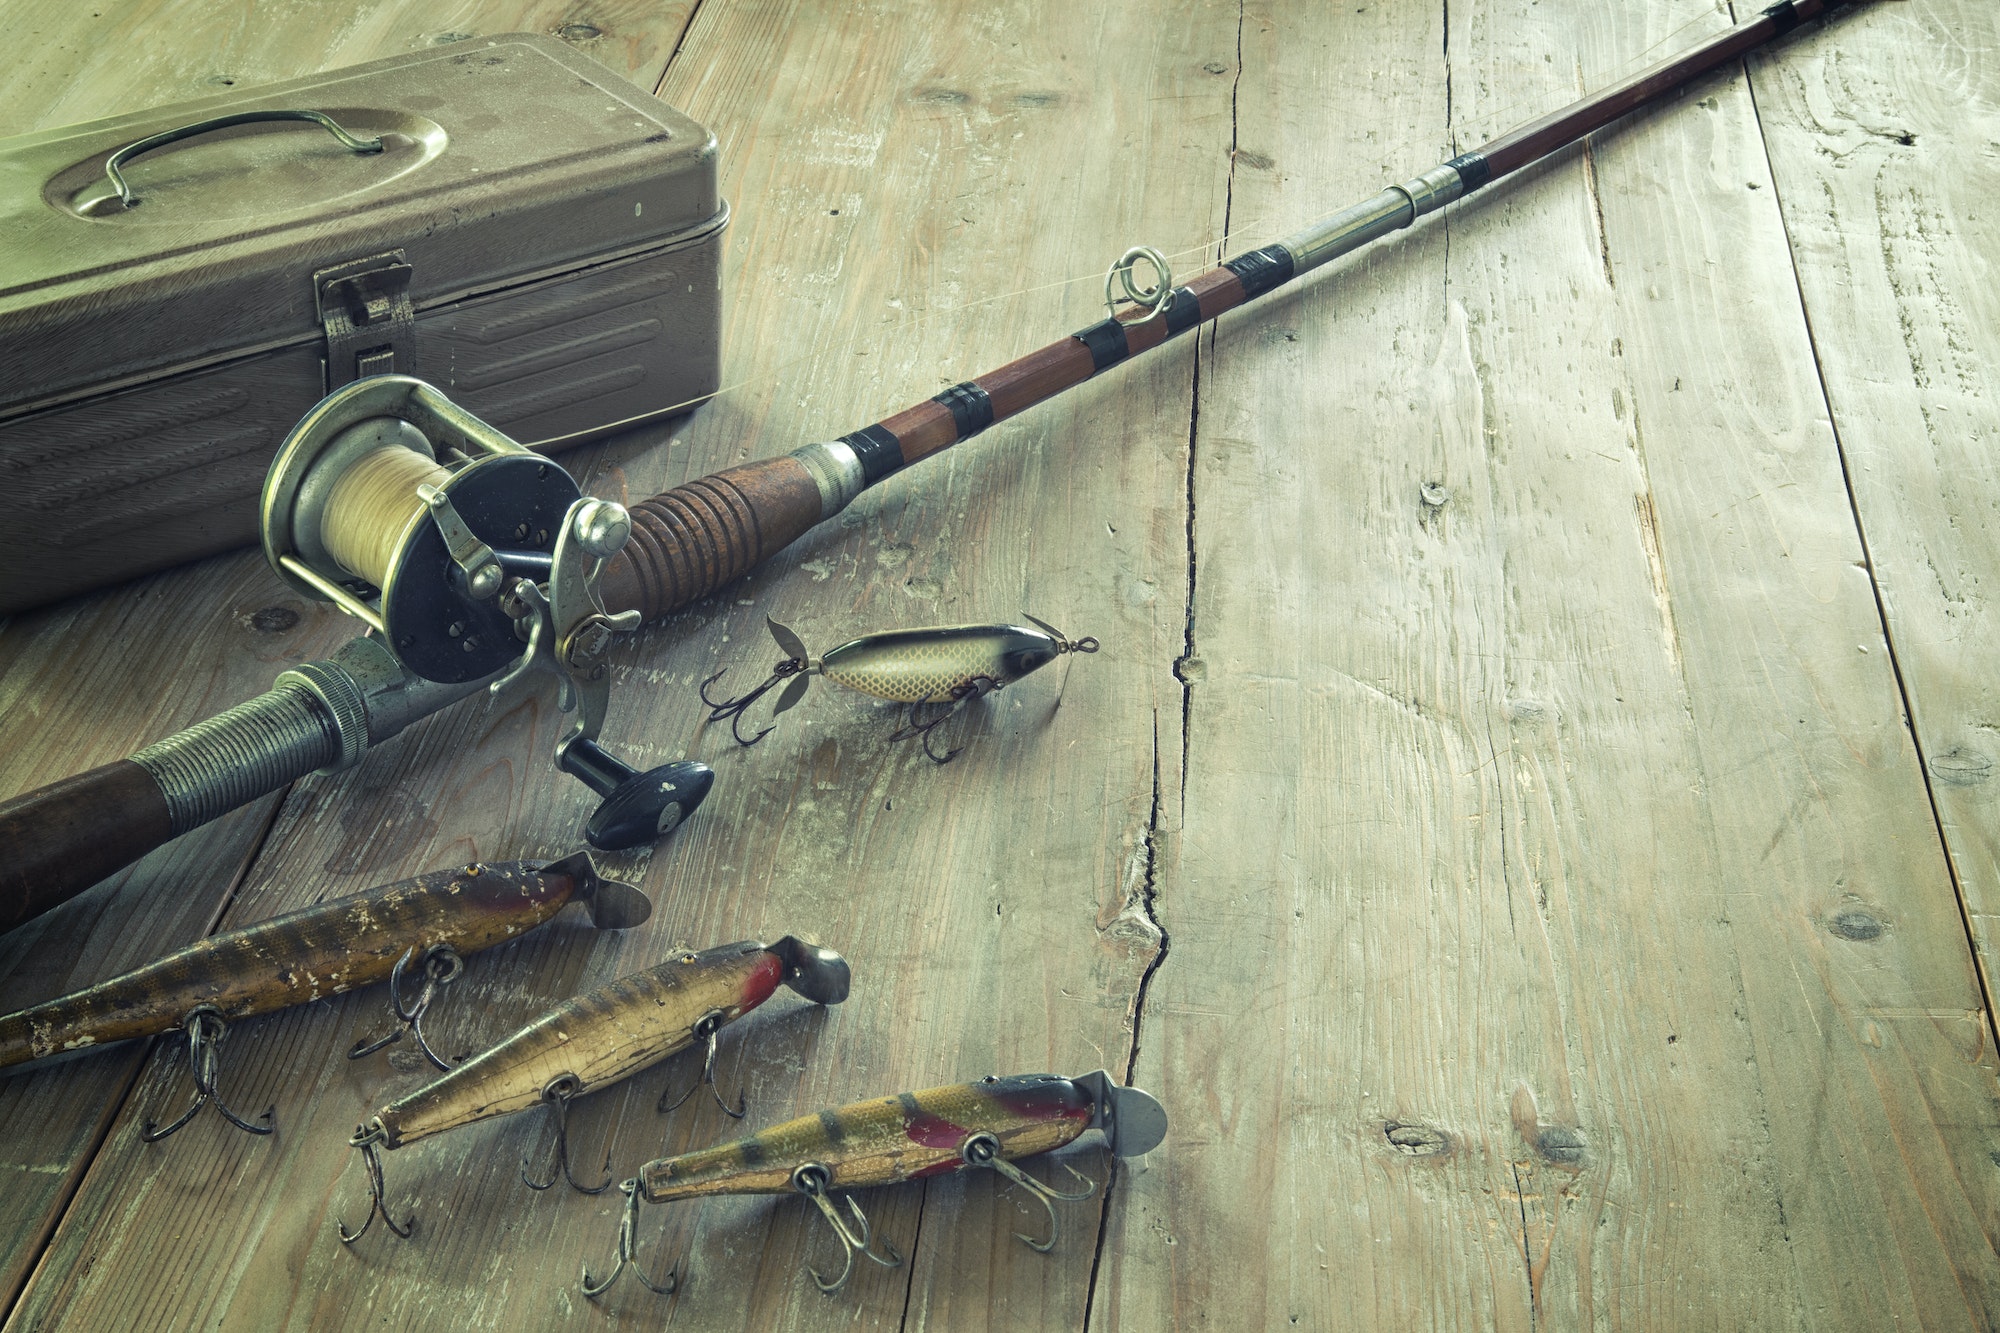 Antique Fishing Rod with Lures and Tackle Box on Wood Surface